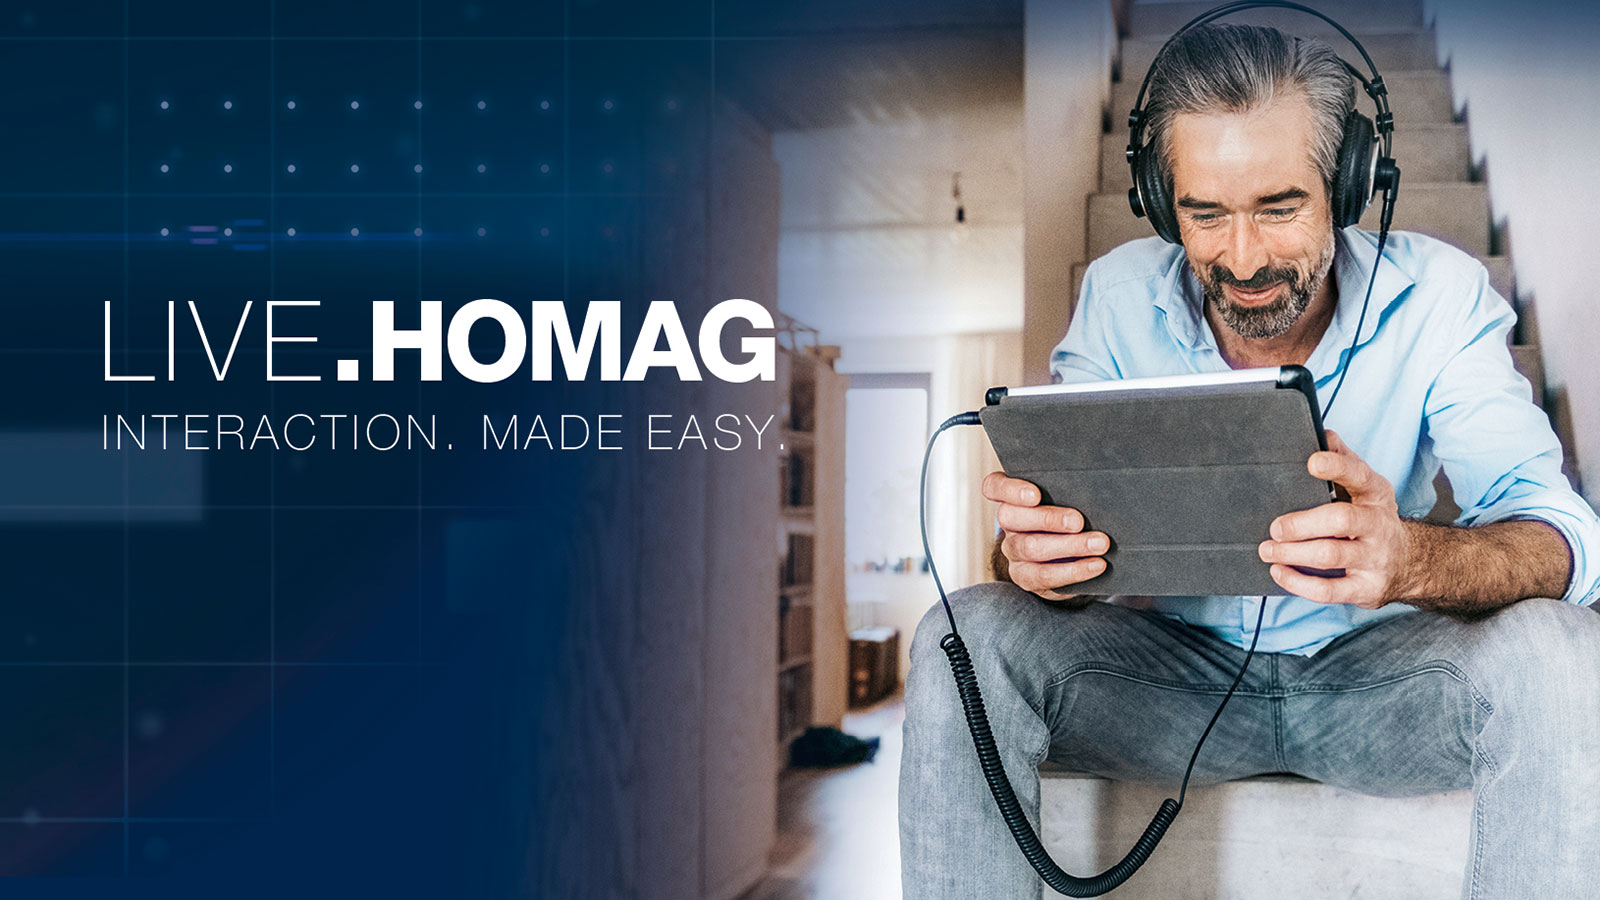 LIVE.HOMAG - Interaction. Made easy.